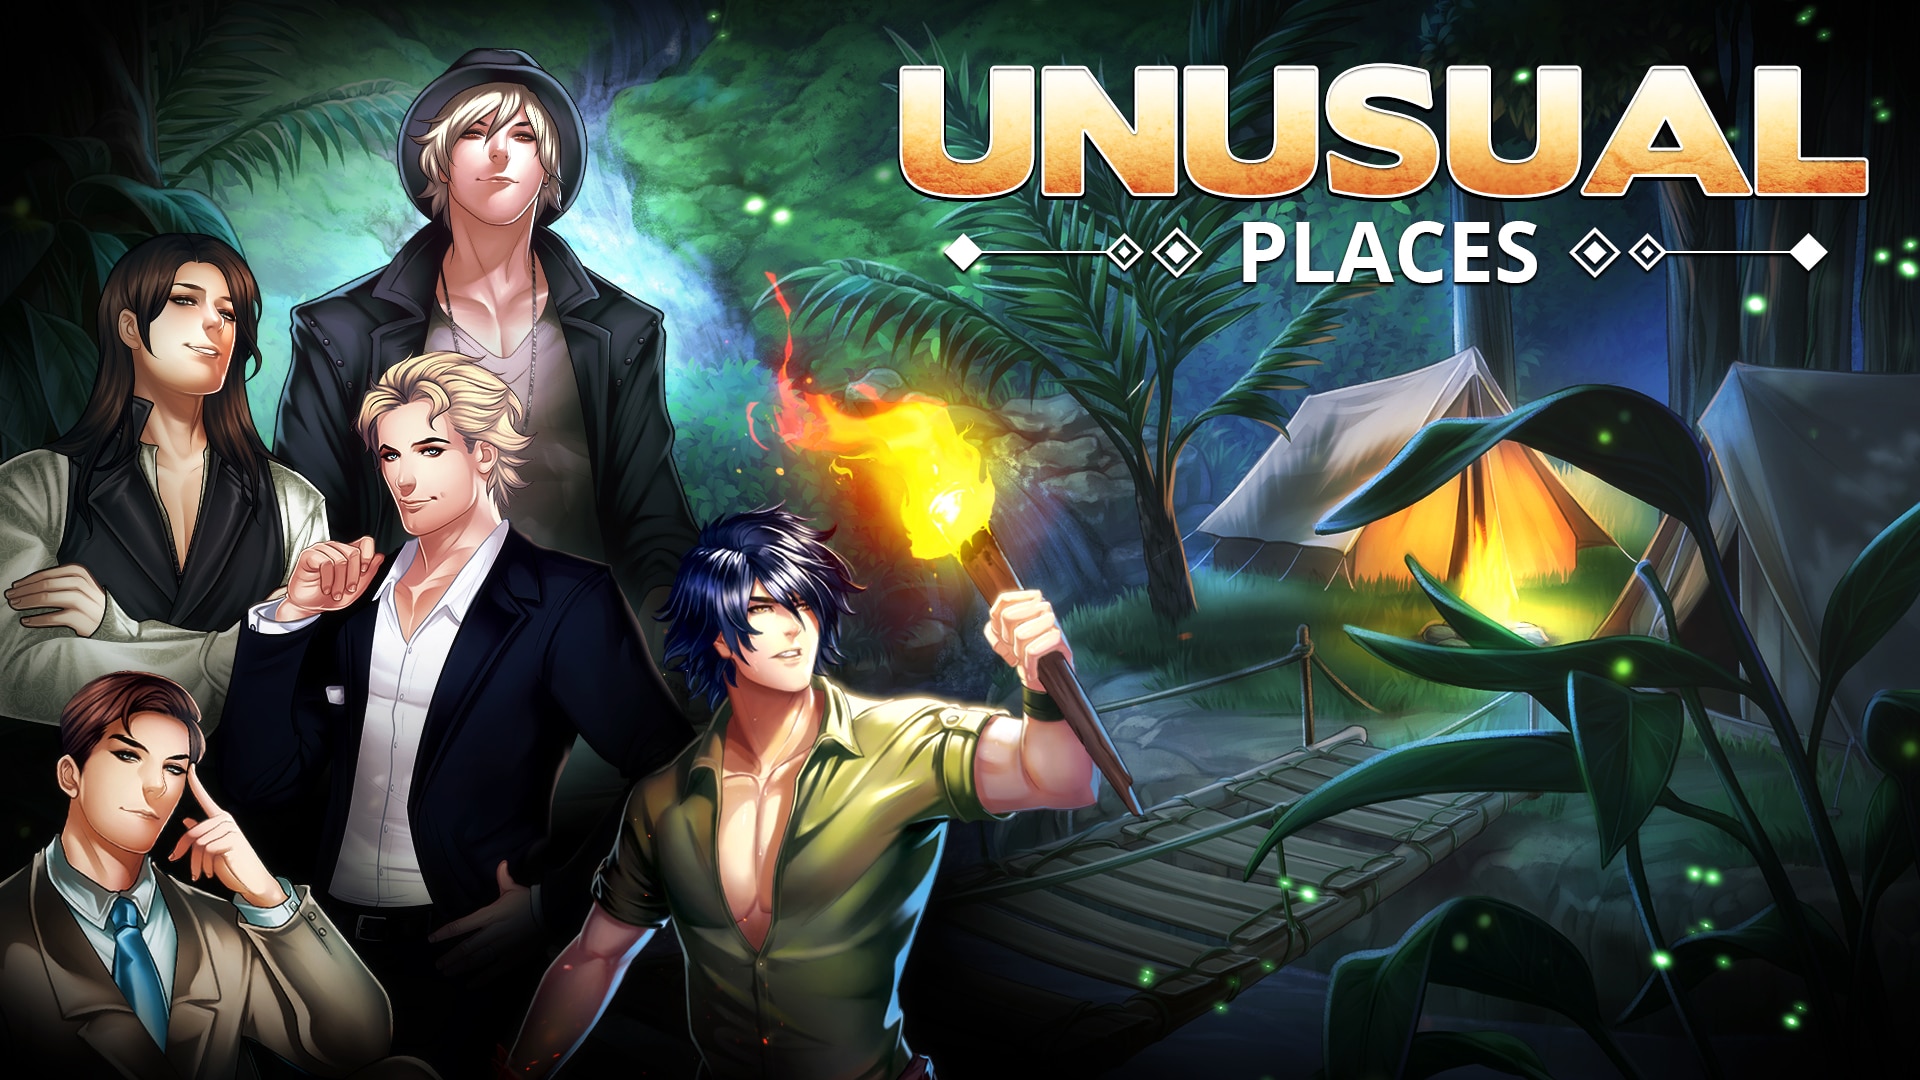 Extra-Event “Unusual Places”